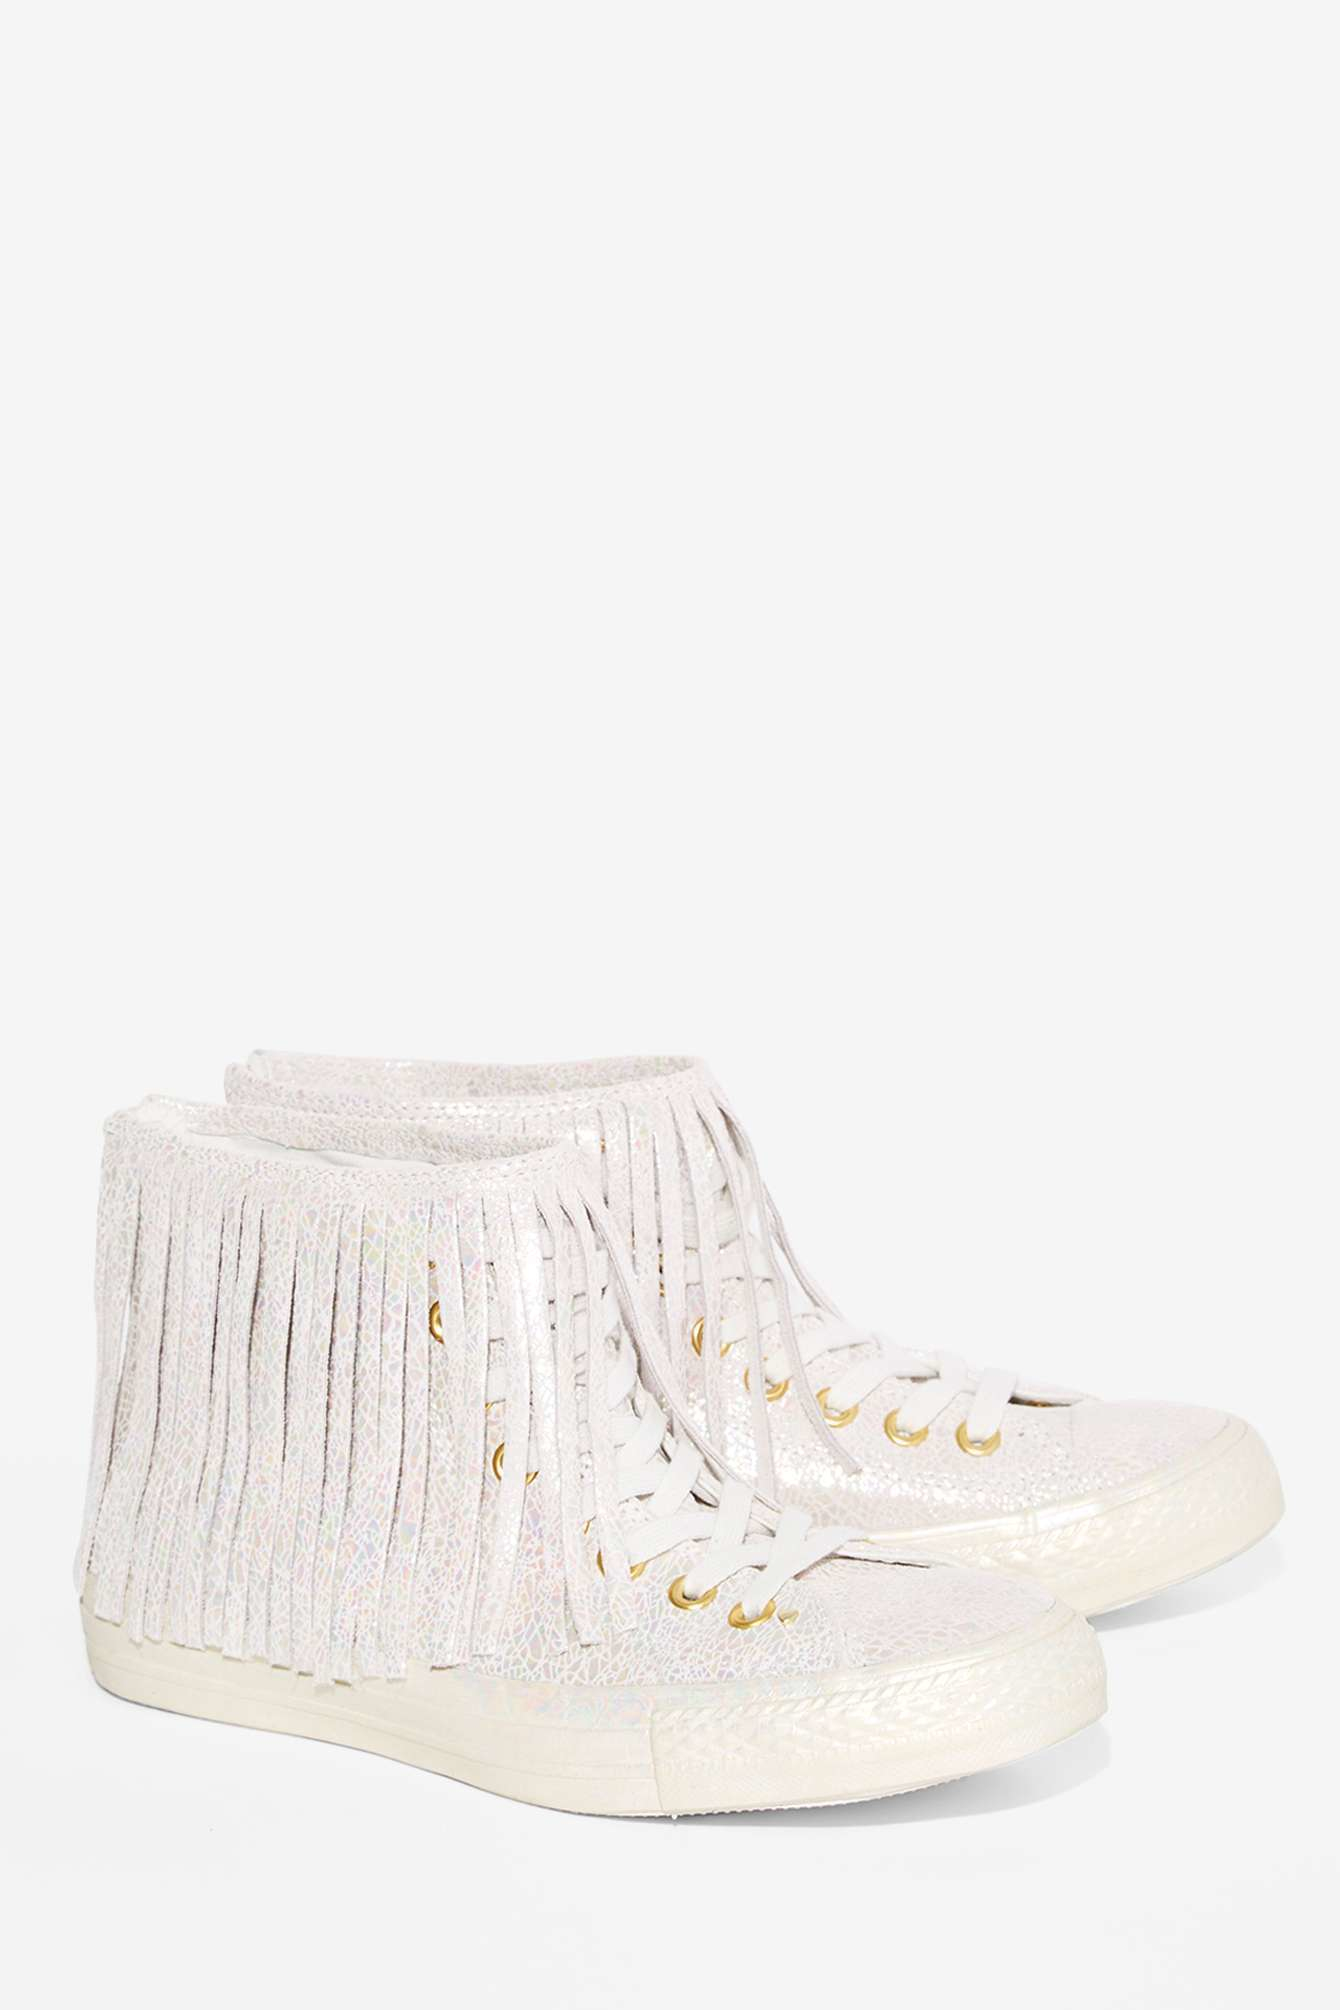 white leather converse high tops womens